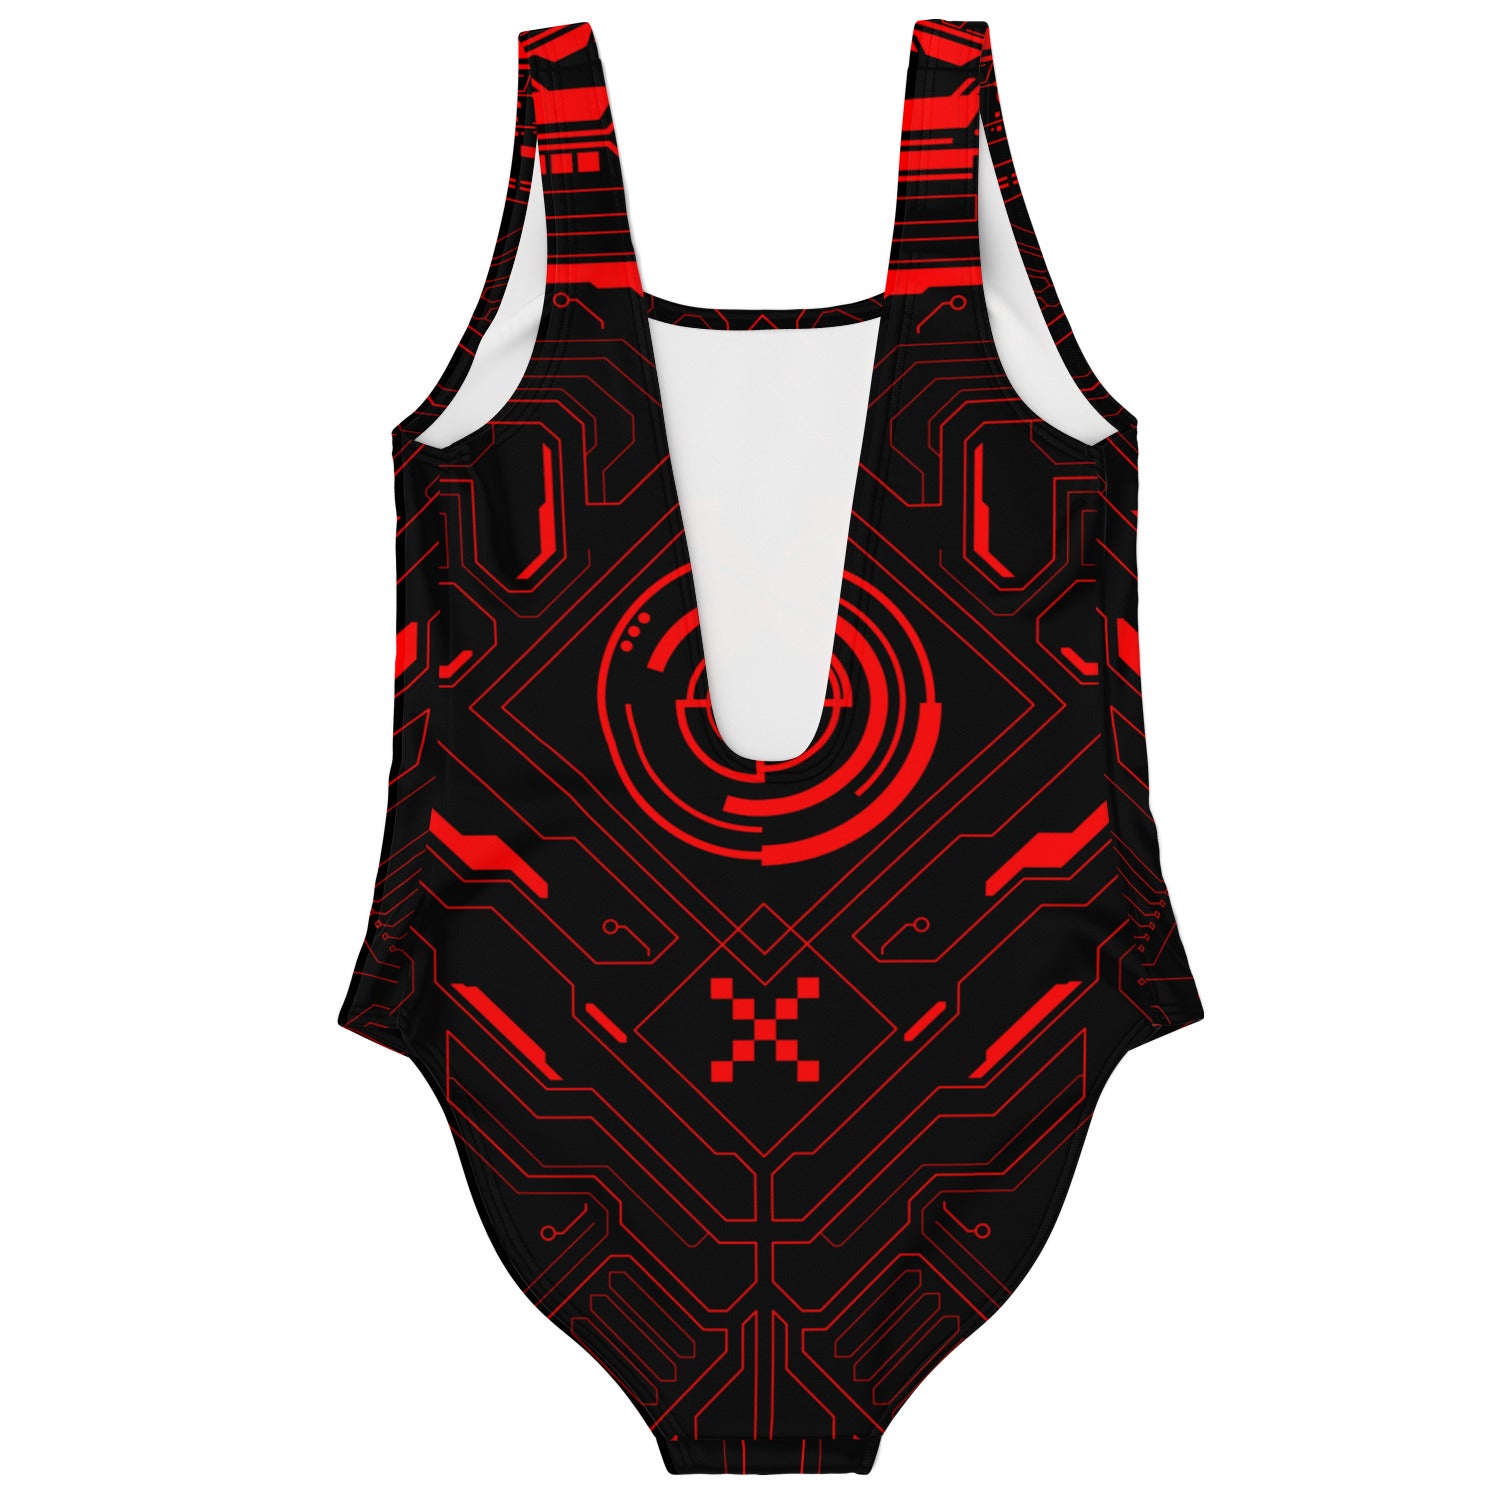 A black and red Cyberpunk Hud Rave Bodysuit.